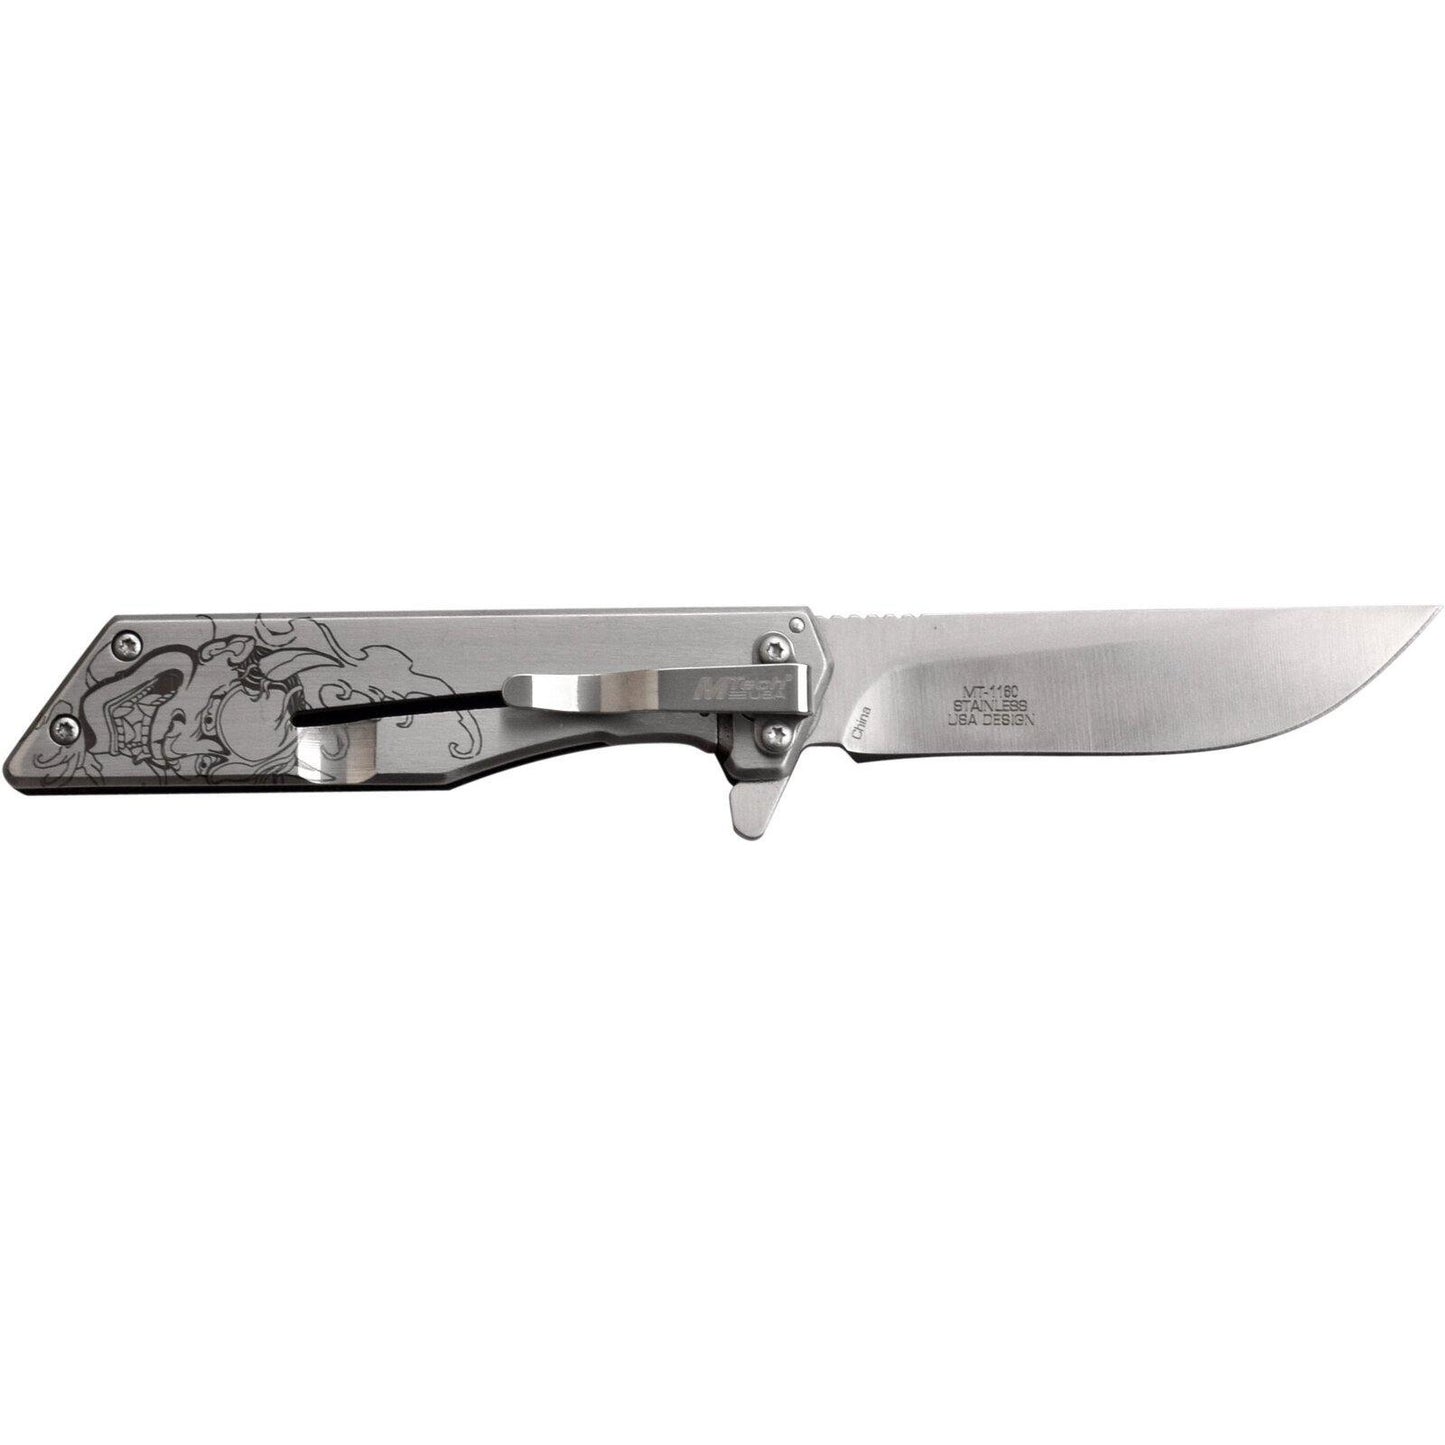 Mtech Drop Point Fine Edge Blade Folding Knife - 7 Inches Overall G10 Handle #mt-1160Ld - Xhunter New Zealand